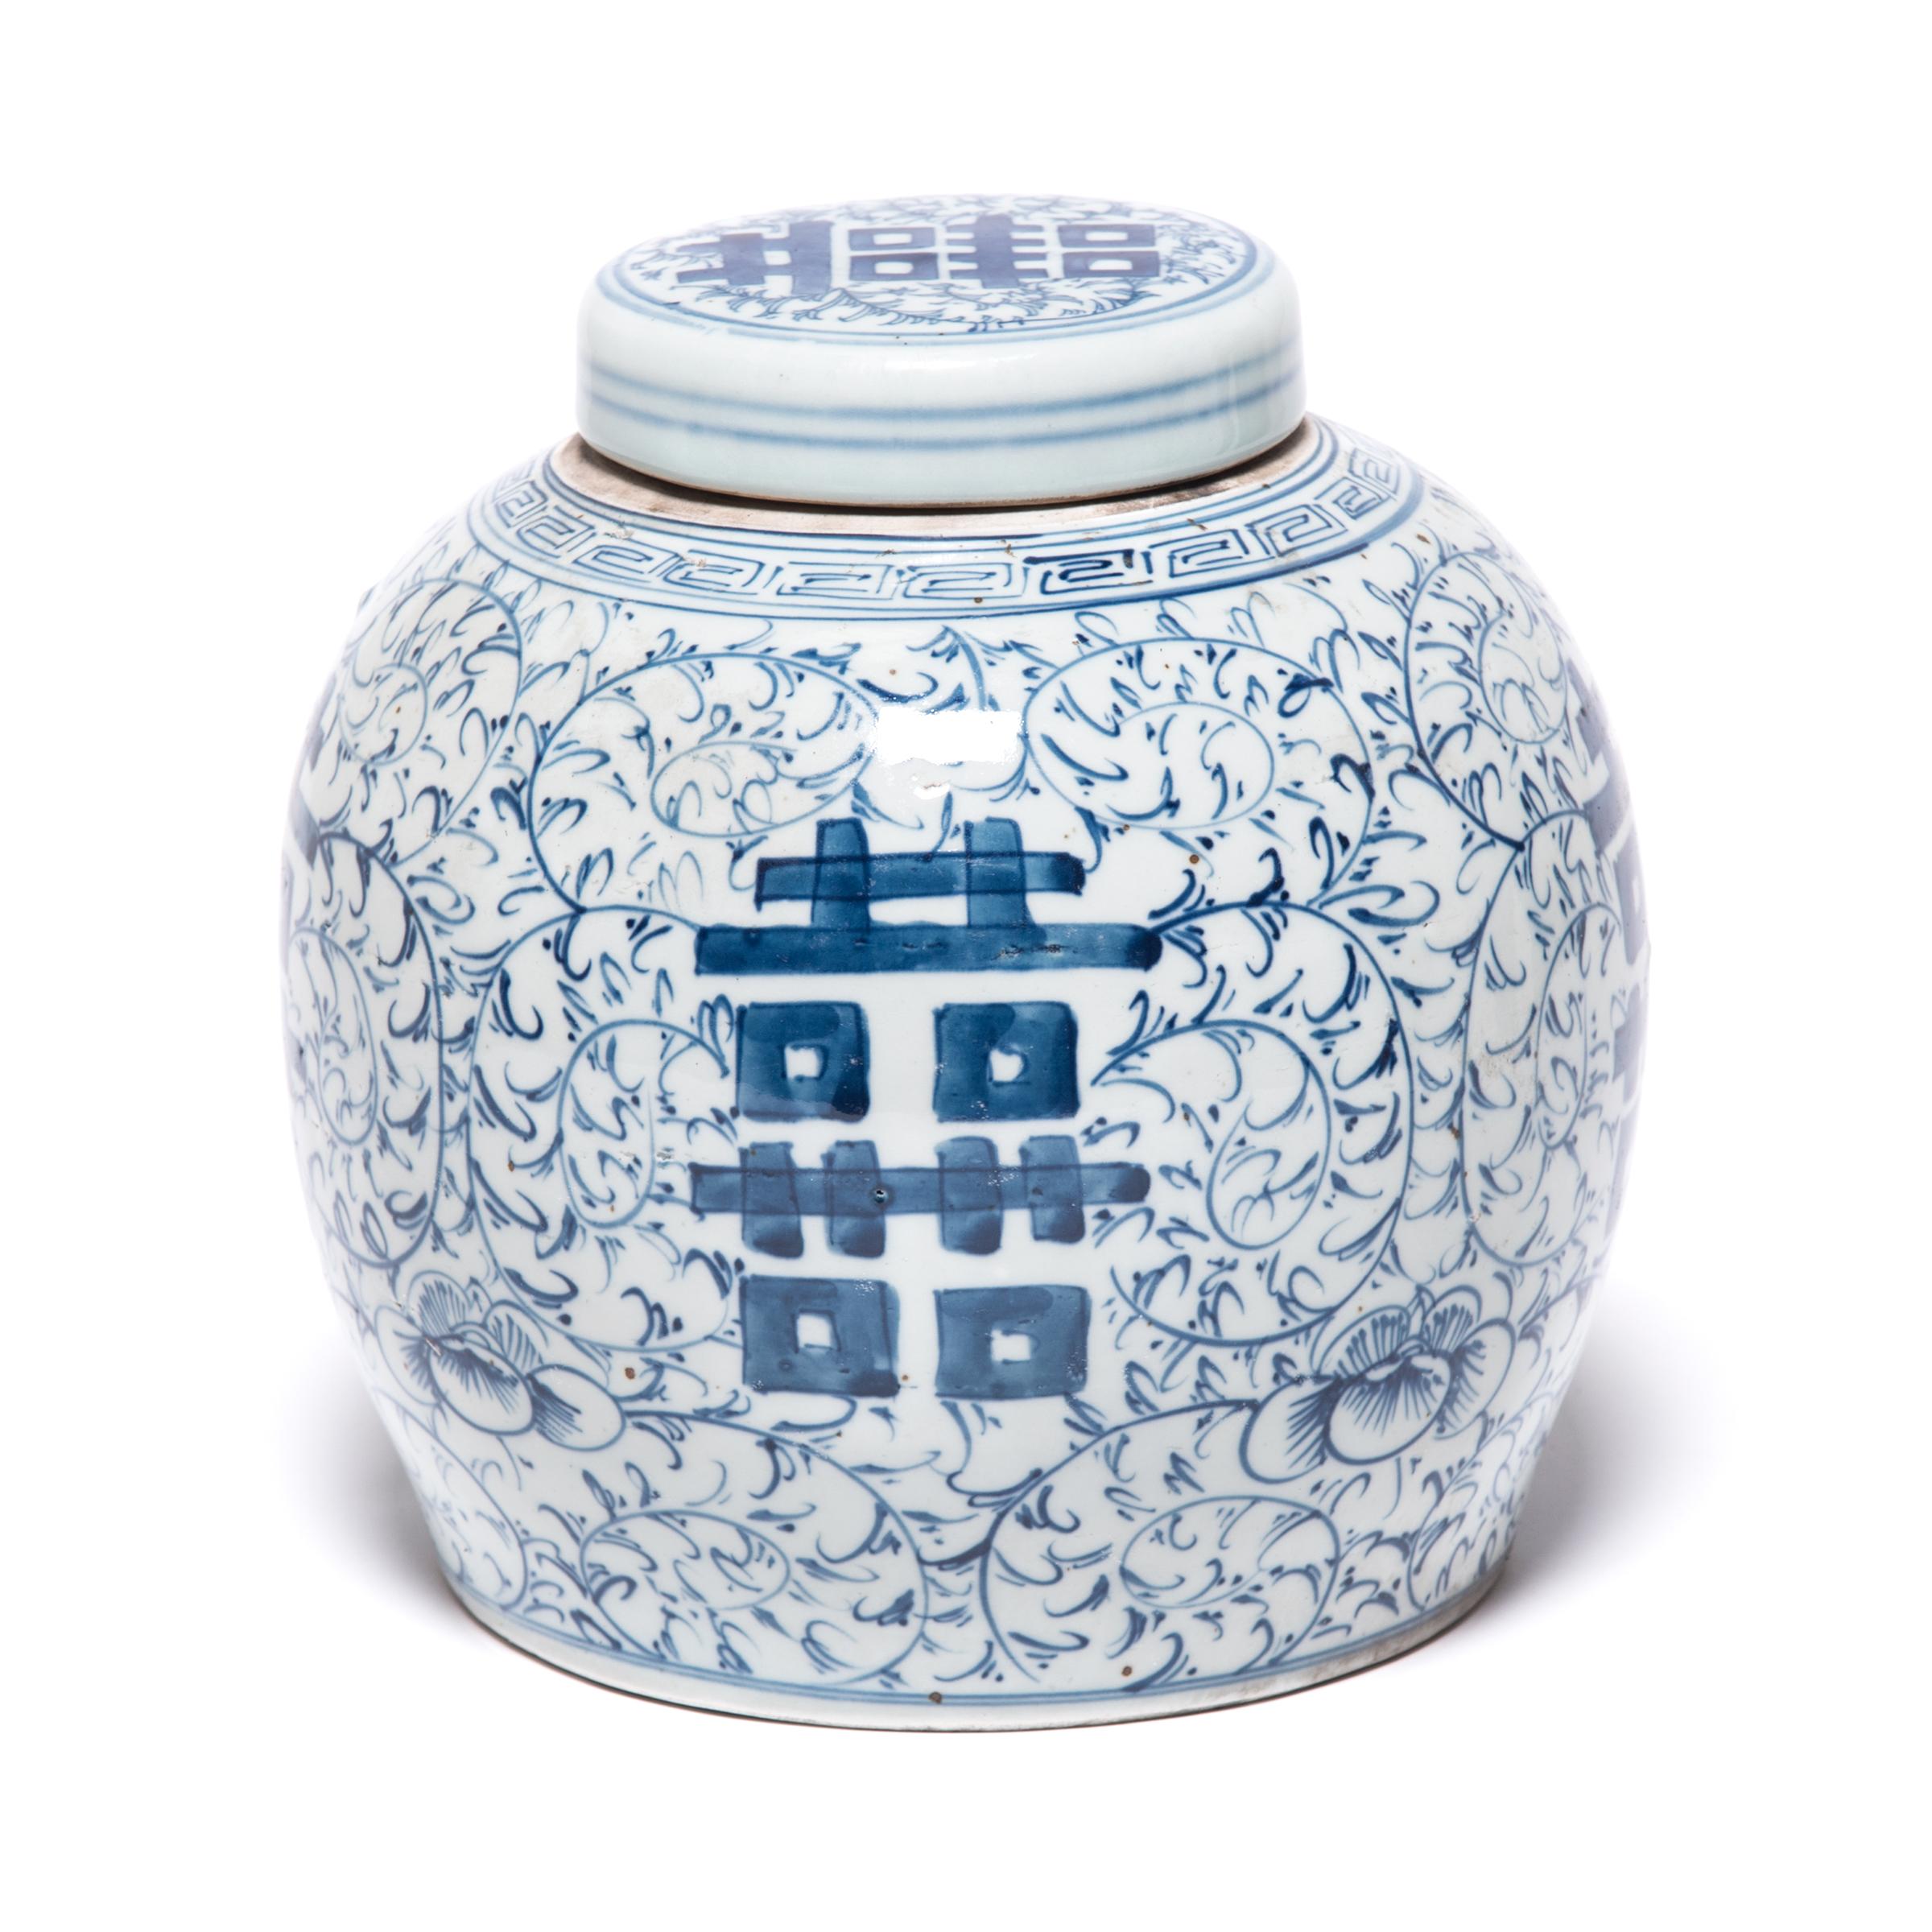 Glazed Chinese Blue and White Double Happiness Ginger Jar, circa 1900